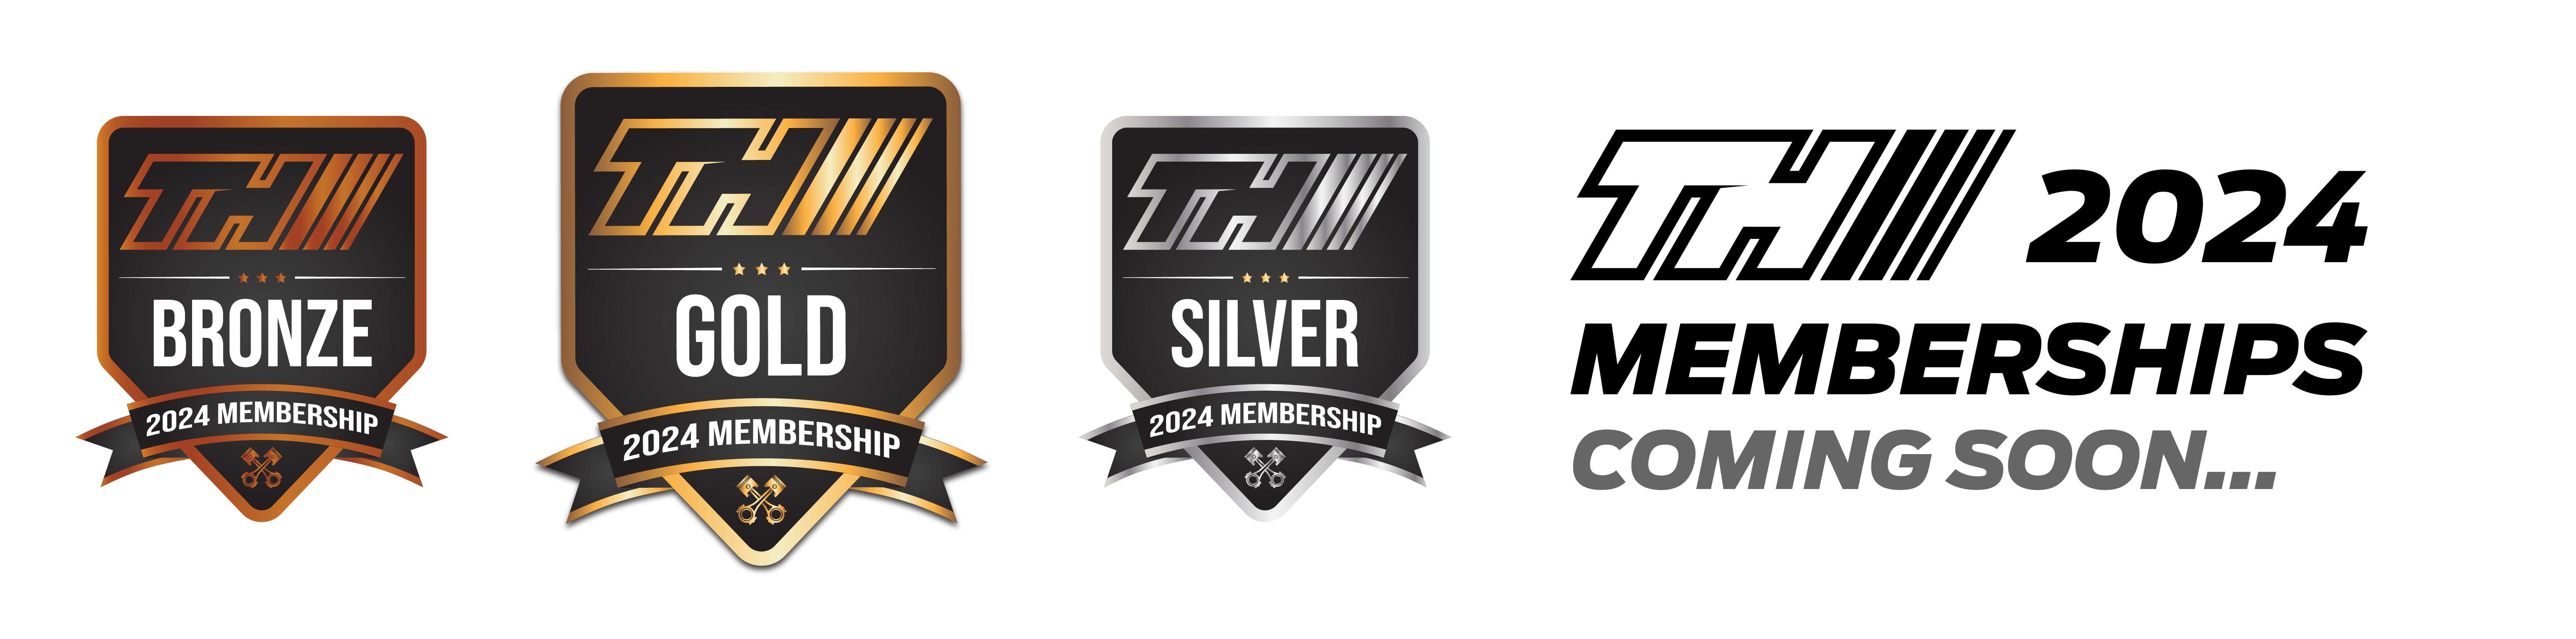 2023 Memberships Now Available